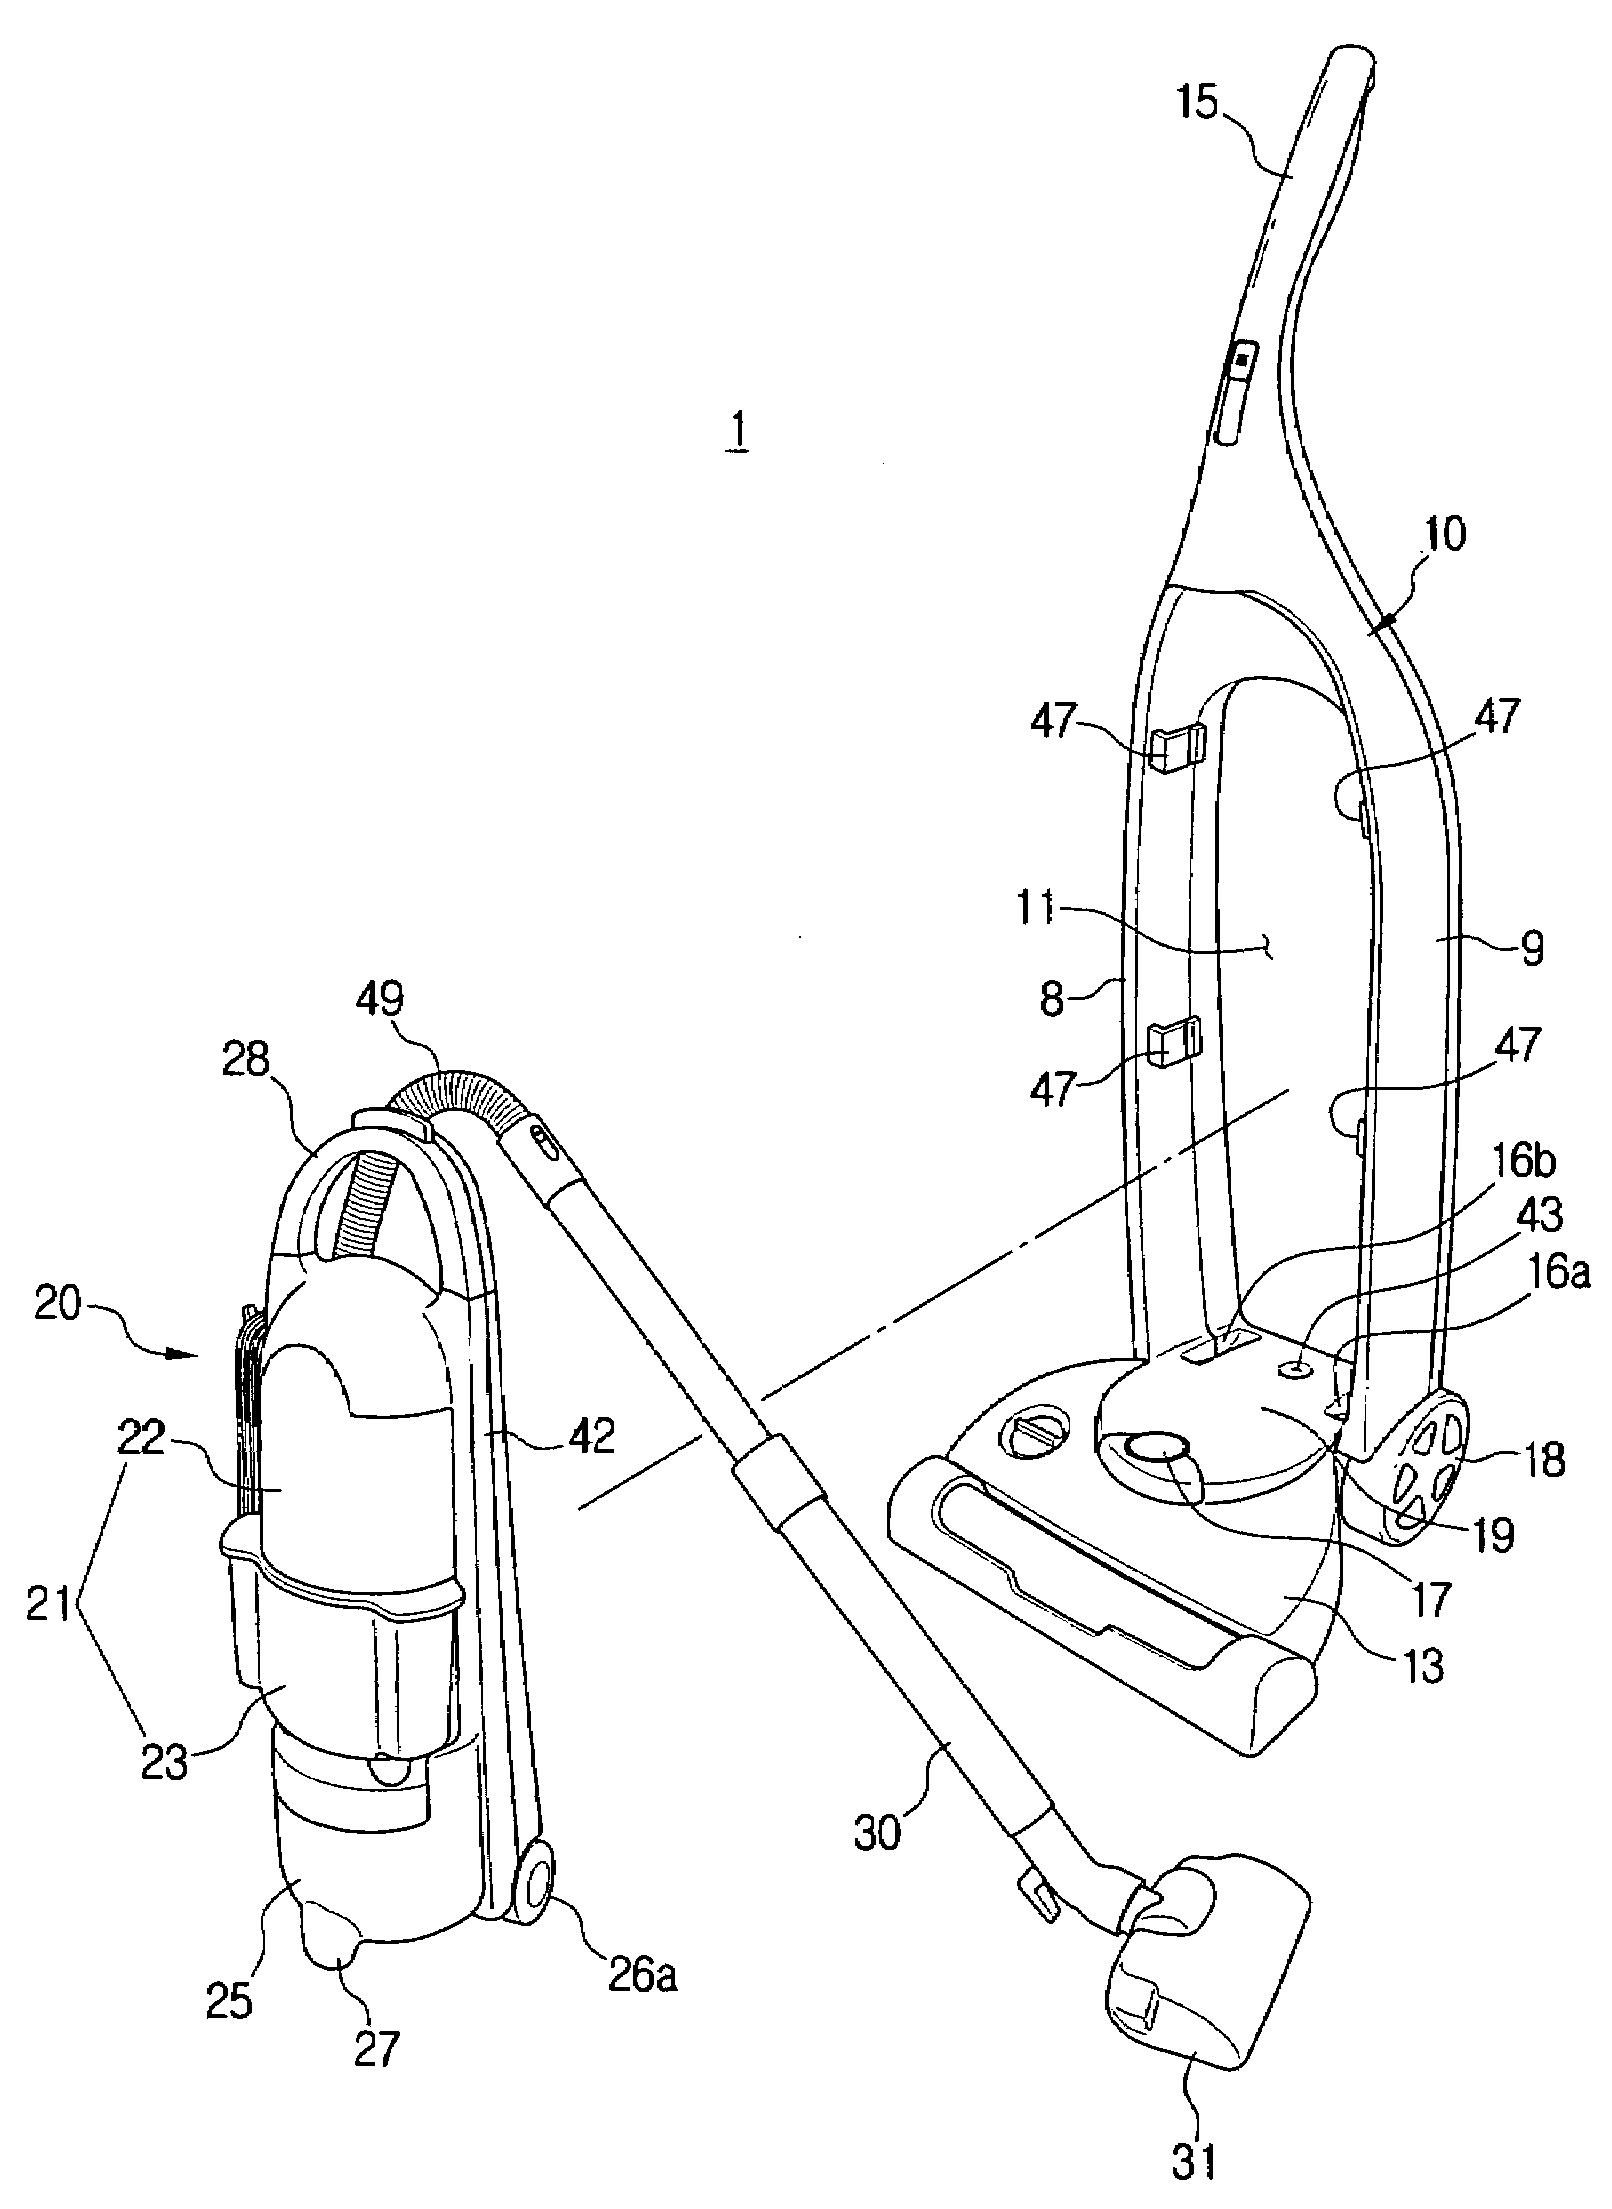 Vacuum cleaner having main body detachably mounted in frame